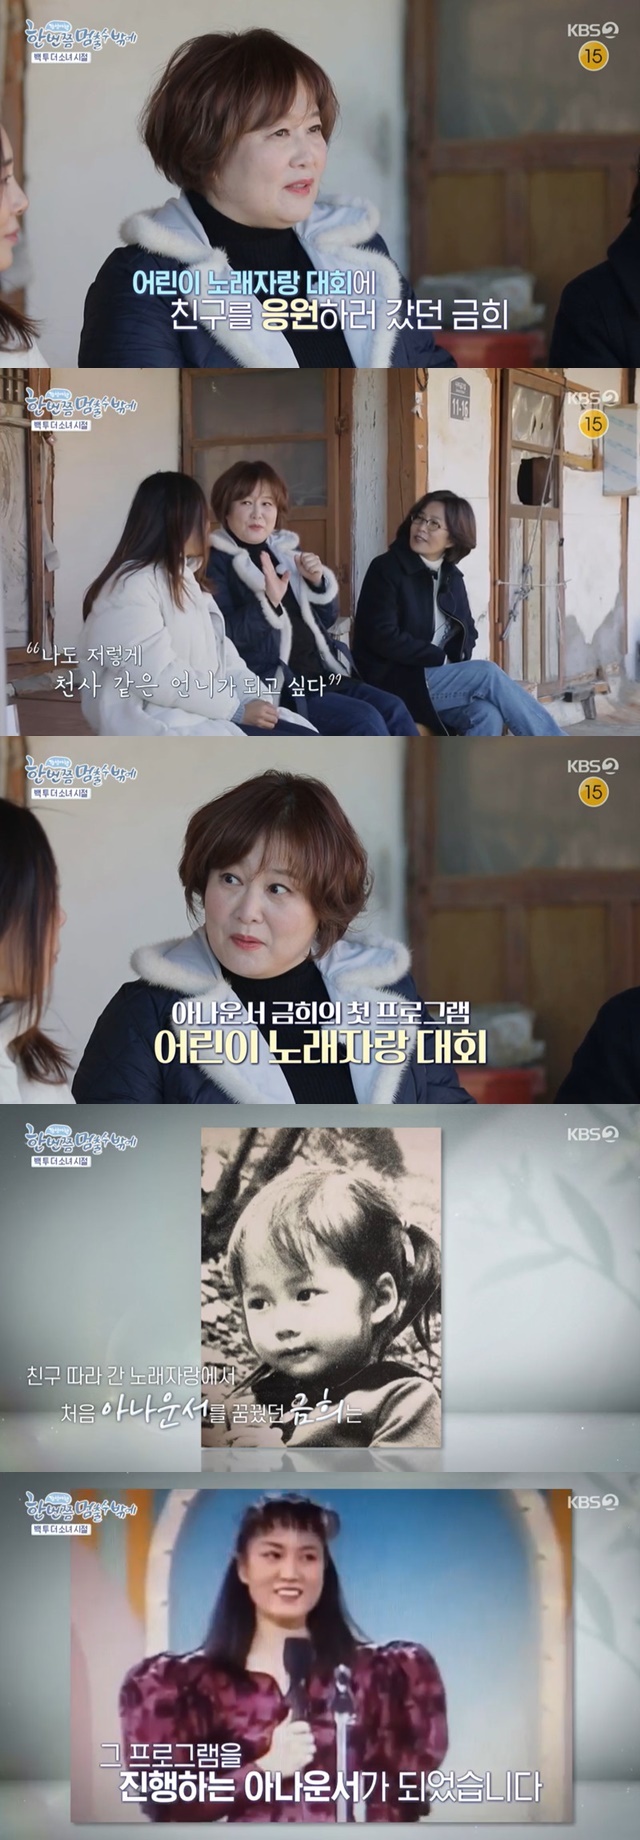 Past videos were released during Lee Geum-hees rookie announcer days.Lee Sun-hee and Lee Geum-hee went on a trip to Samcheok with actor Moon Jeong-hee on KBS 2TVs One Time to Stop, which aired on January 20.On the day of the broadcast, Lee Sun-hee brought up a dream story when he was a child, and Moon Jeong-hee said, The gymnast was a dream. Do you know the comanec?I cant forget it because its shocking, he said, referring to the machine gymnast Komanecchi.Lee said, I was a dream announcer.When I was in the fourth grade of elementary school, I went to cheer for my friends song, but I was sitting in the audience, and my sister like an angel came out and said, Good morning to the children. But the first program I became an announcer was a childrens song show.Is it too amazing? he surprised everyone.When I was a kid, I wanted to sing vaguely, I wanted to paint, Lee said. When I thought everyone should have a job in high school, I thought then, I should be a singer.